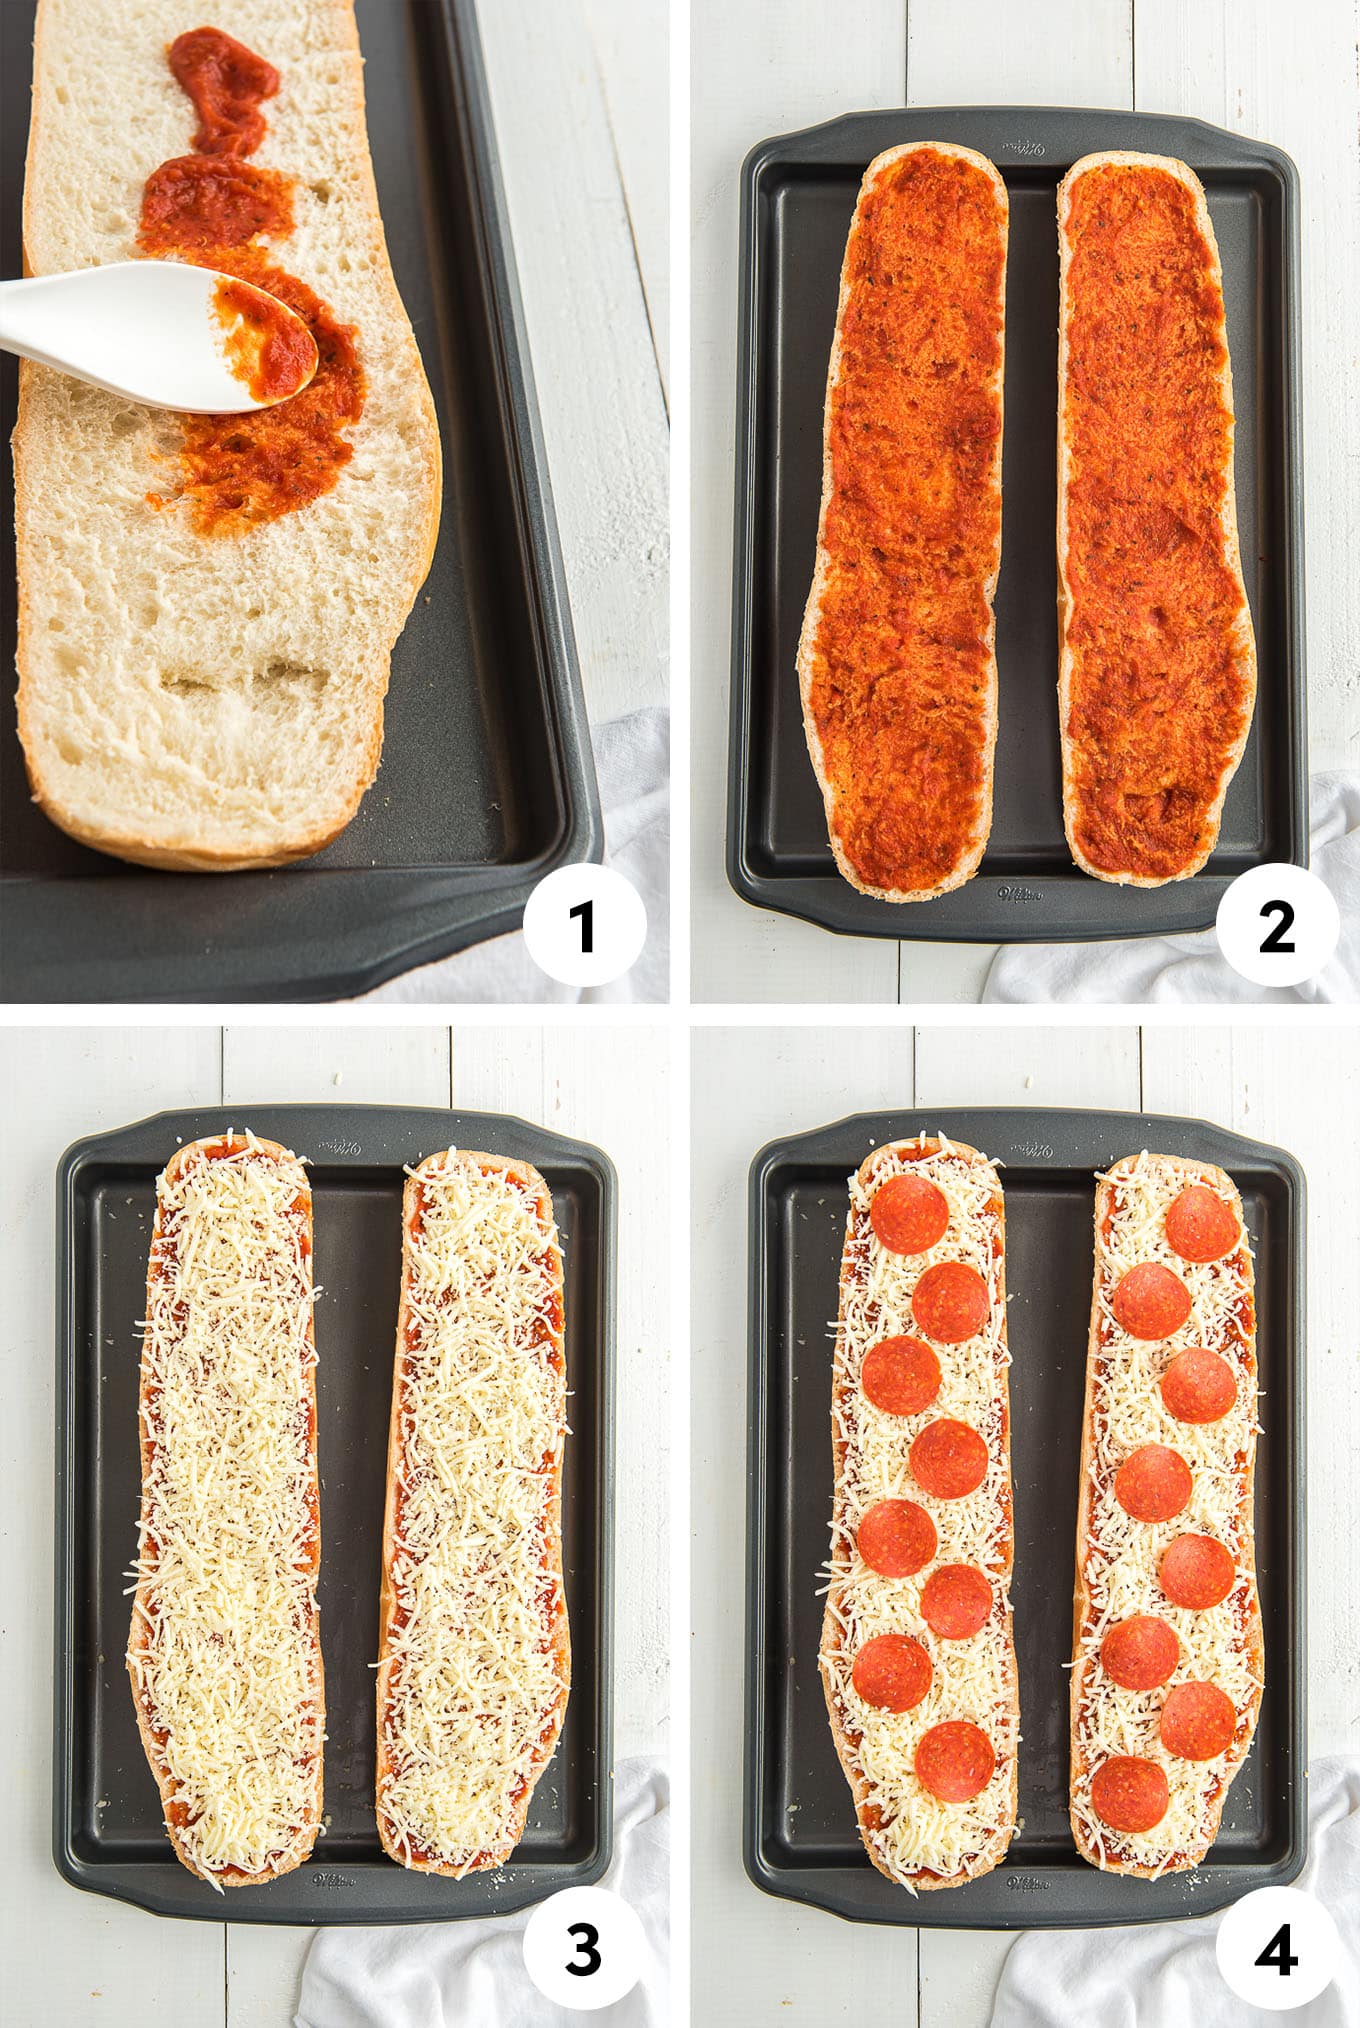 Step by step process photos on how to make pizza on french bread.